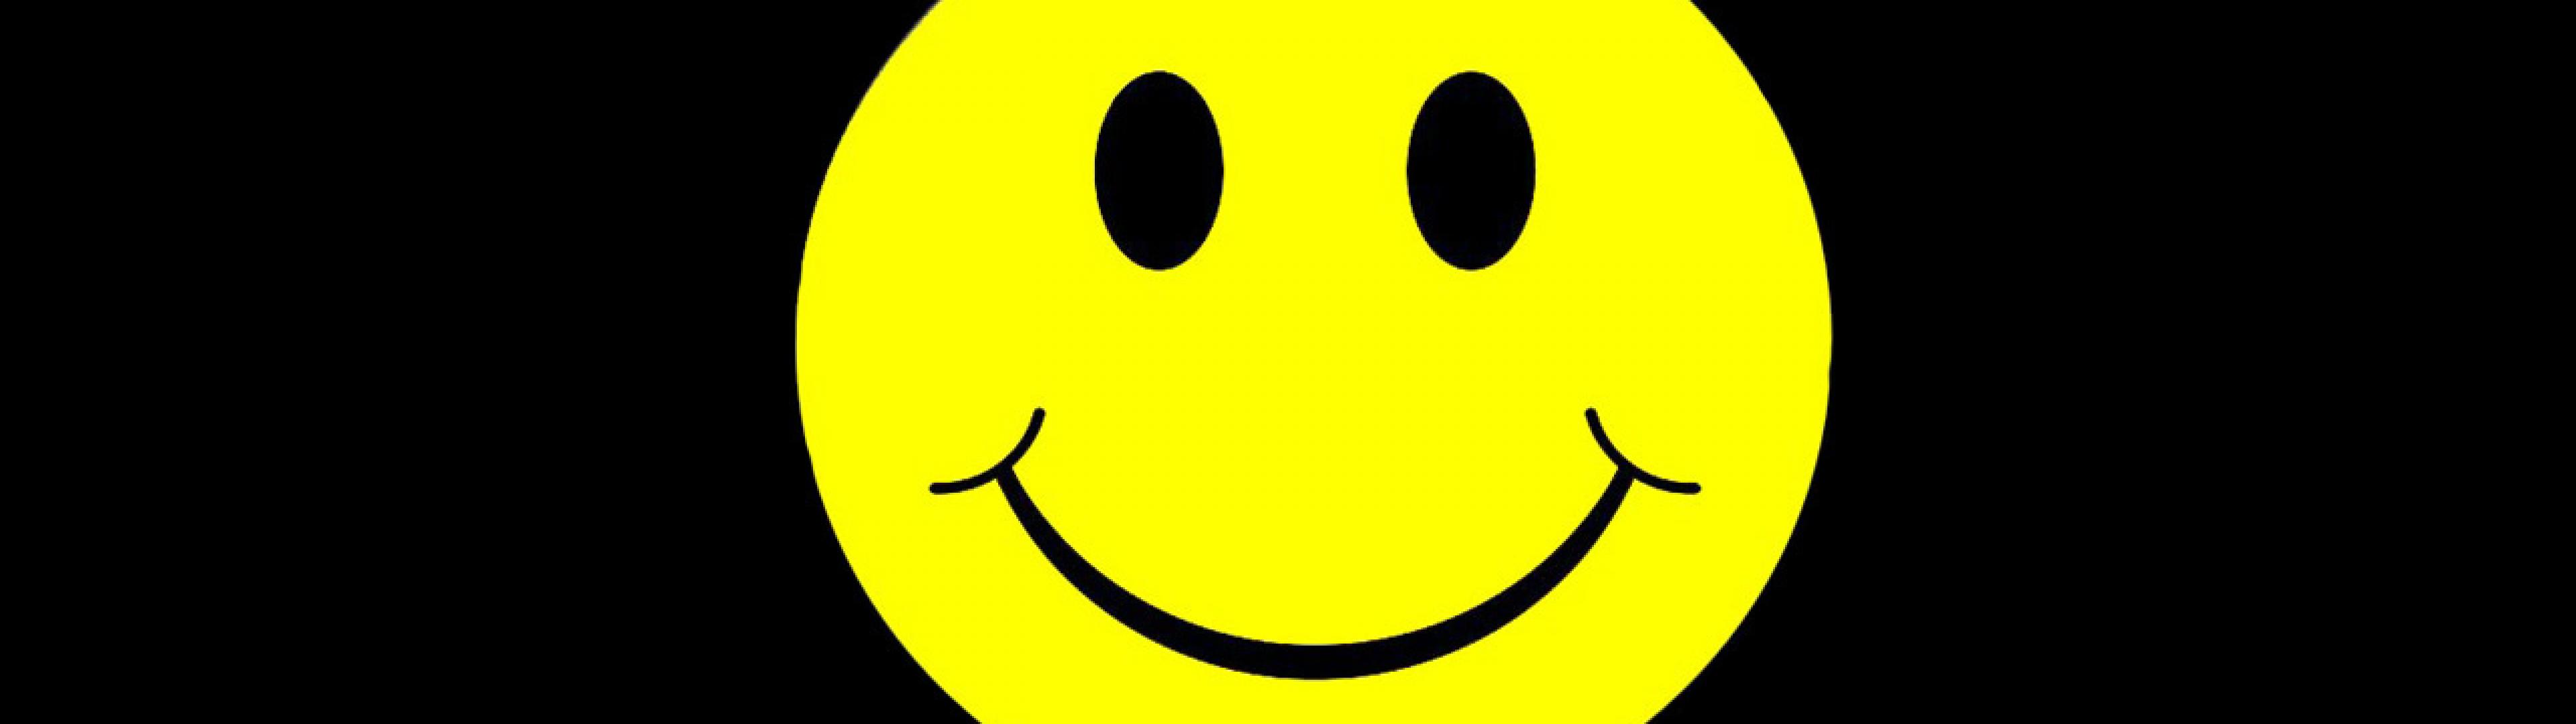 happy smiley face faces black background acid house Ultra or Dual High